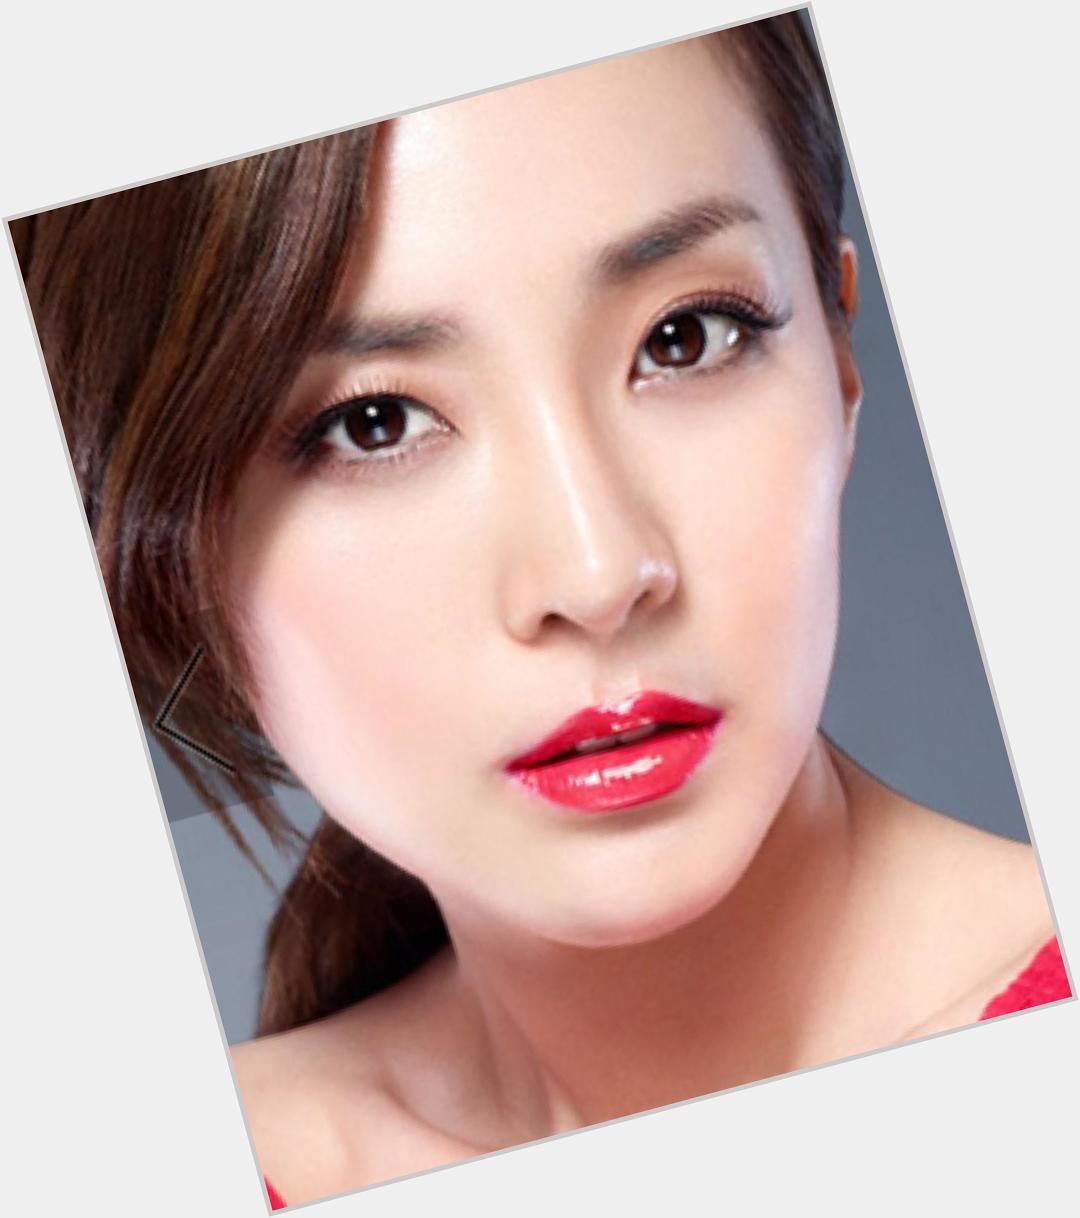 Happy Birthday to one of the most humblest celebrities out there, whos beautiful inside and out, Sandara Park ! 